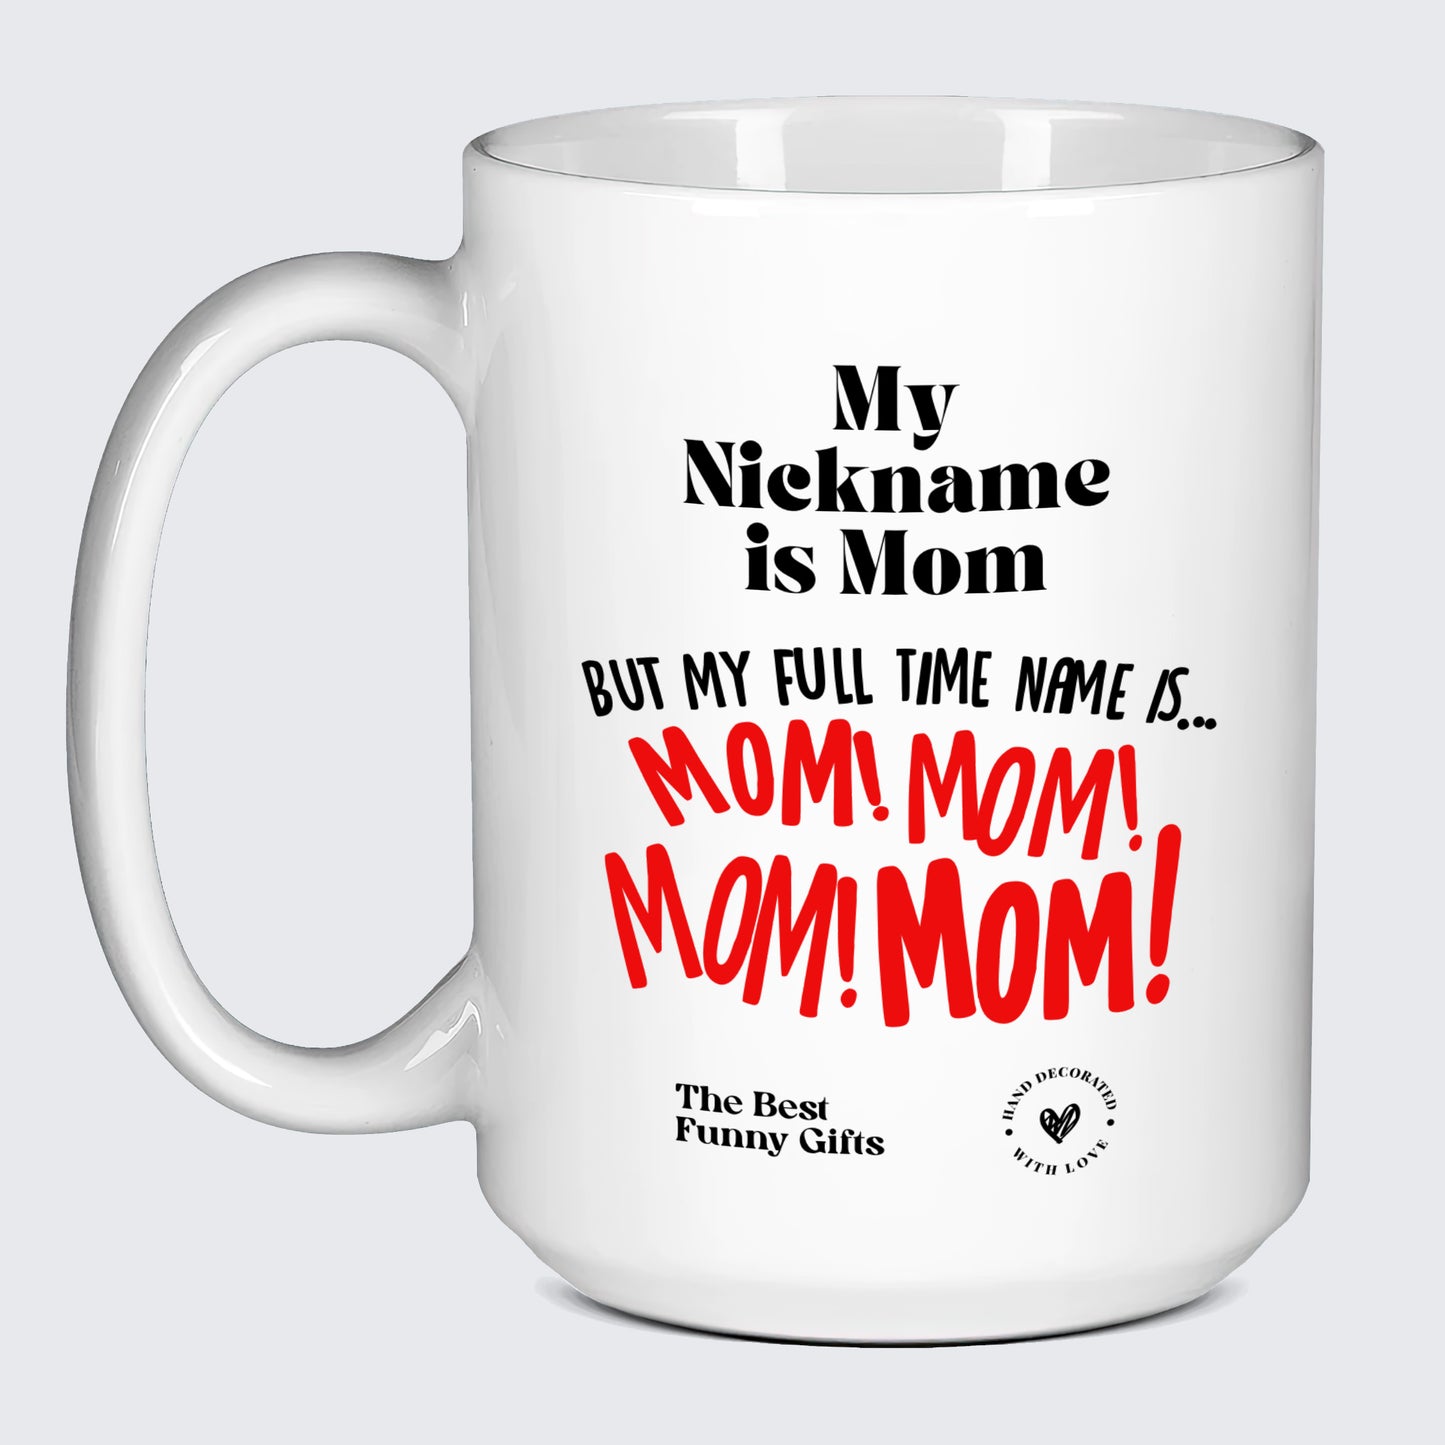 Mugs For Mom My Nickname is Mom (but My Full Time Name is... Mom! Mom! Mom! Mom) - The Best Funny Gifts